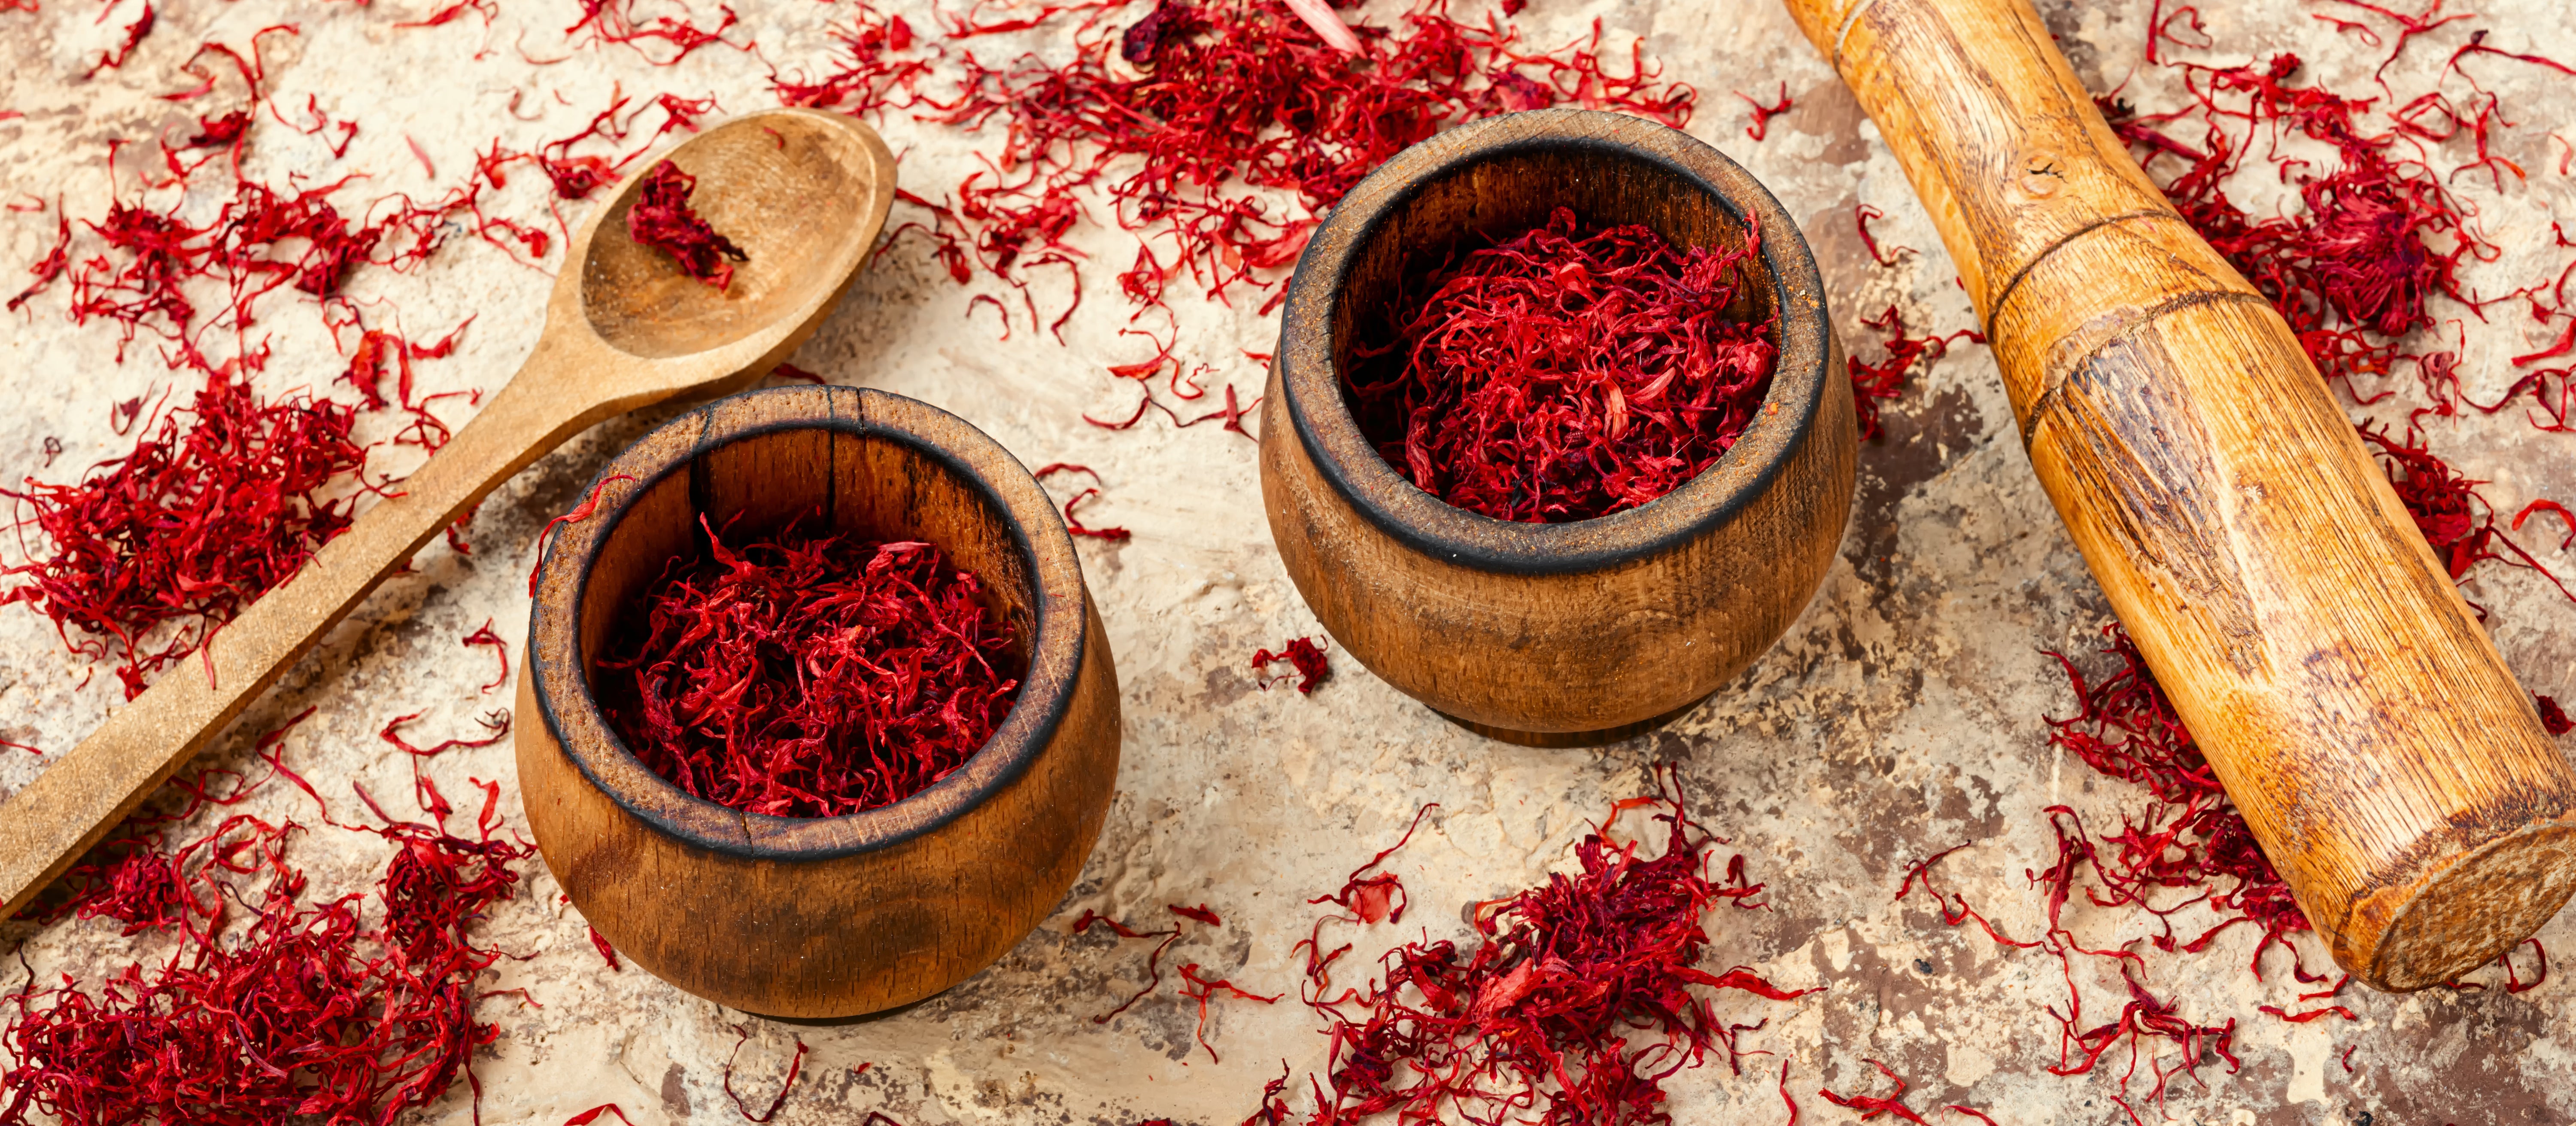 saffron threads in two wooden bowls with wooden spoon and rolling pin